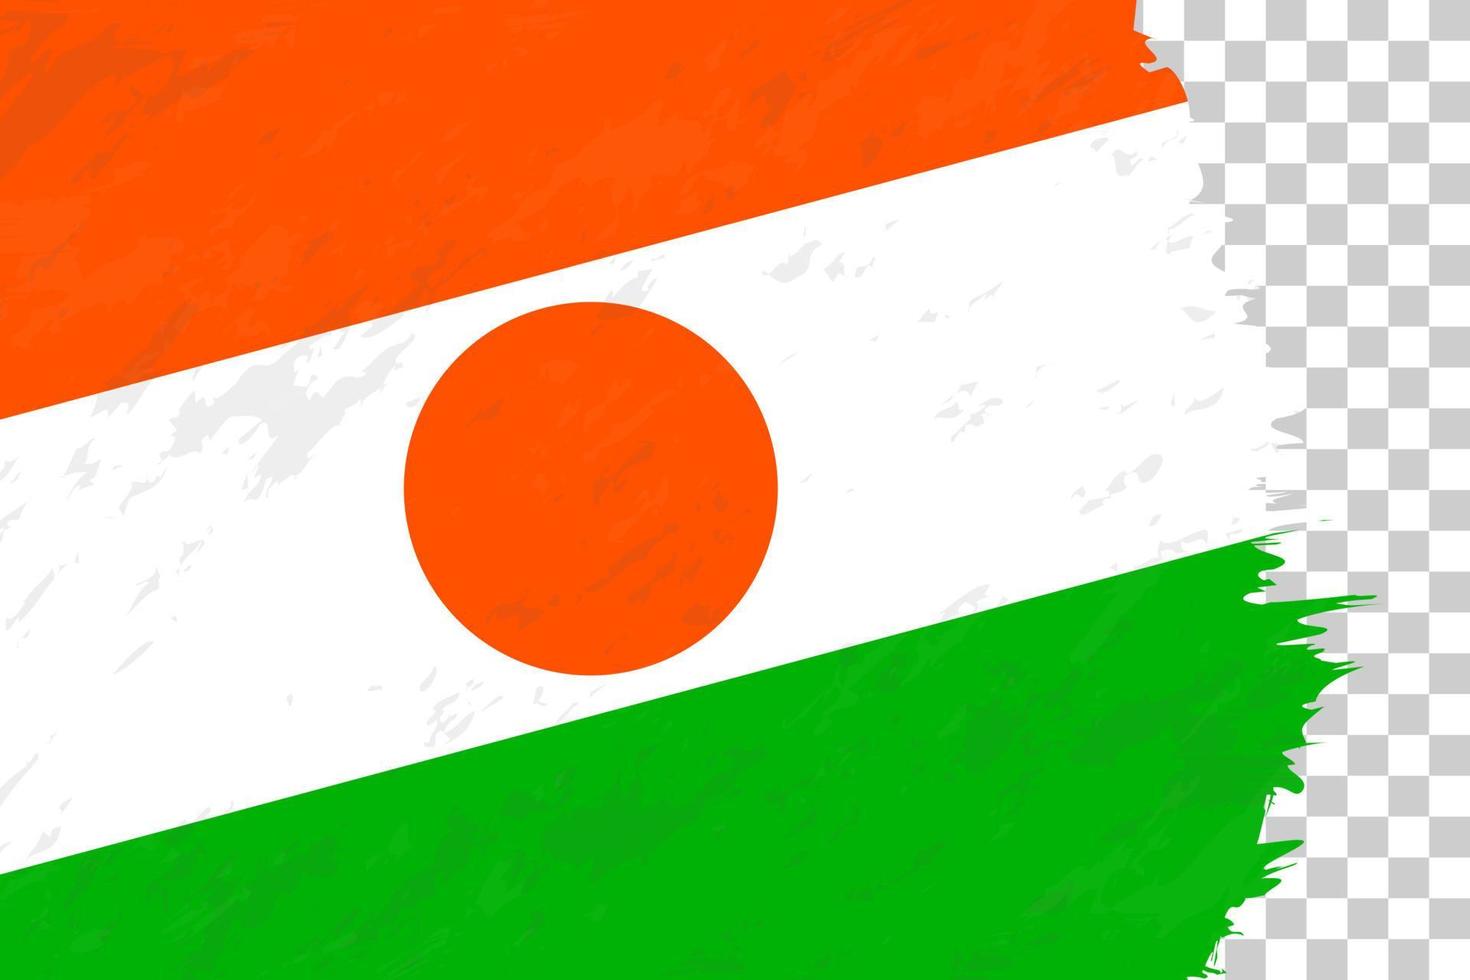 Horizontal Abstract Grunge Brushed Flag of Niger on Transparent Grid. vector